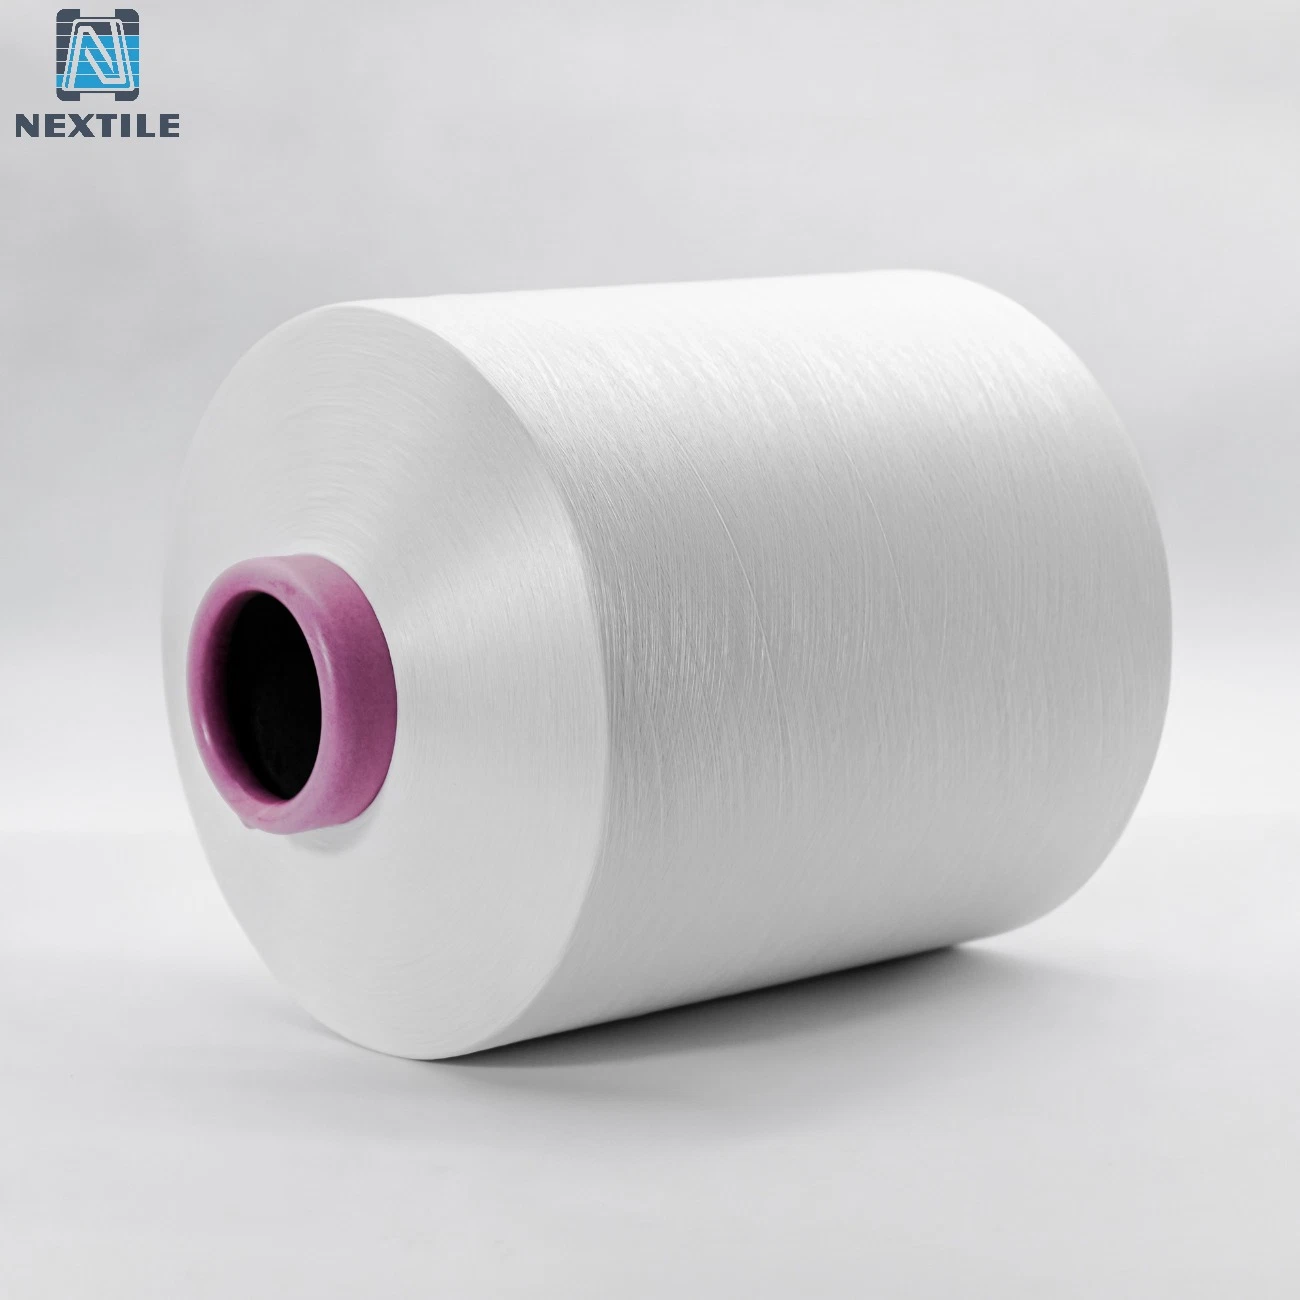 China Manufacturer 80% Polyester 20% Nylon Exclusive Split Yarn Microfiber for Towel Texturized Semi Dull Intermingled Raw White 75D 150d 160/72*16